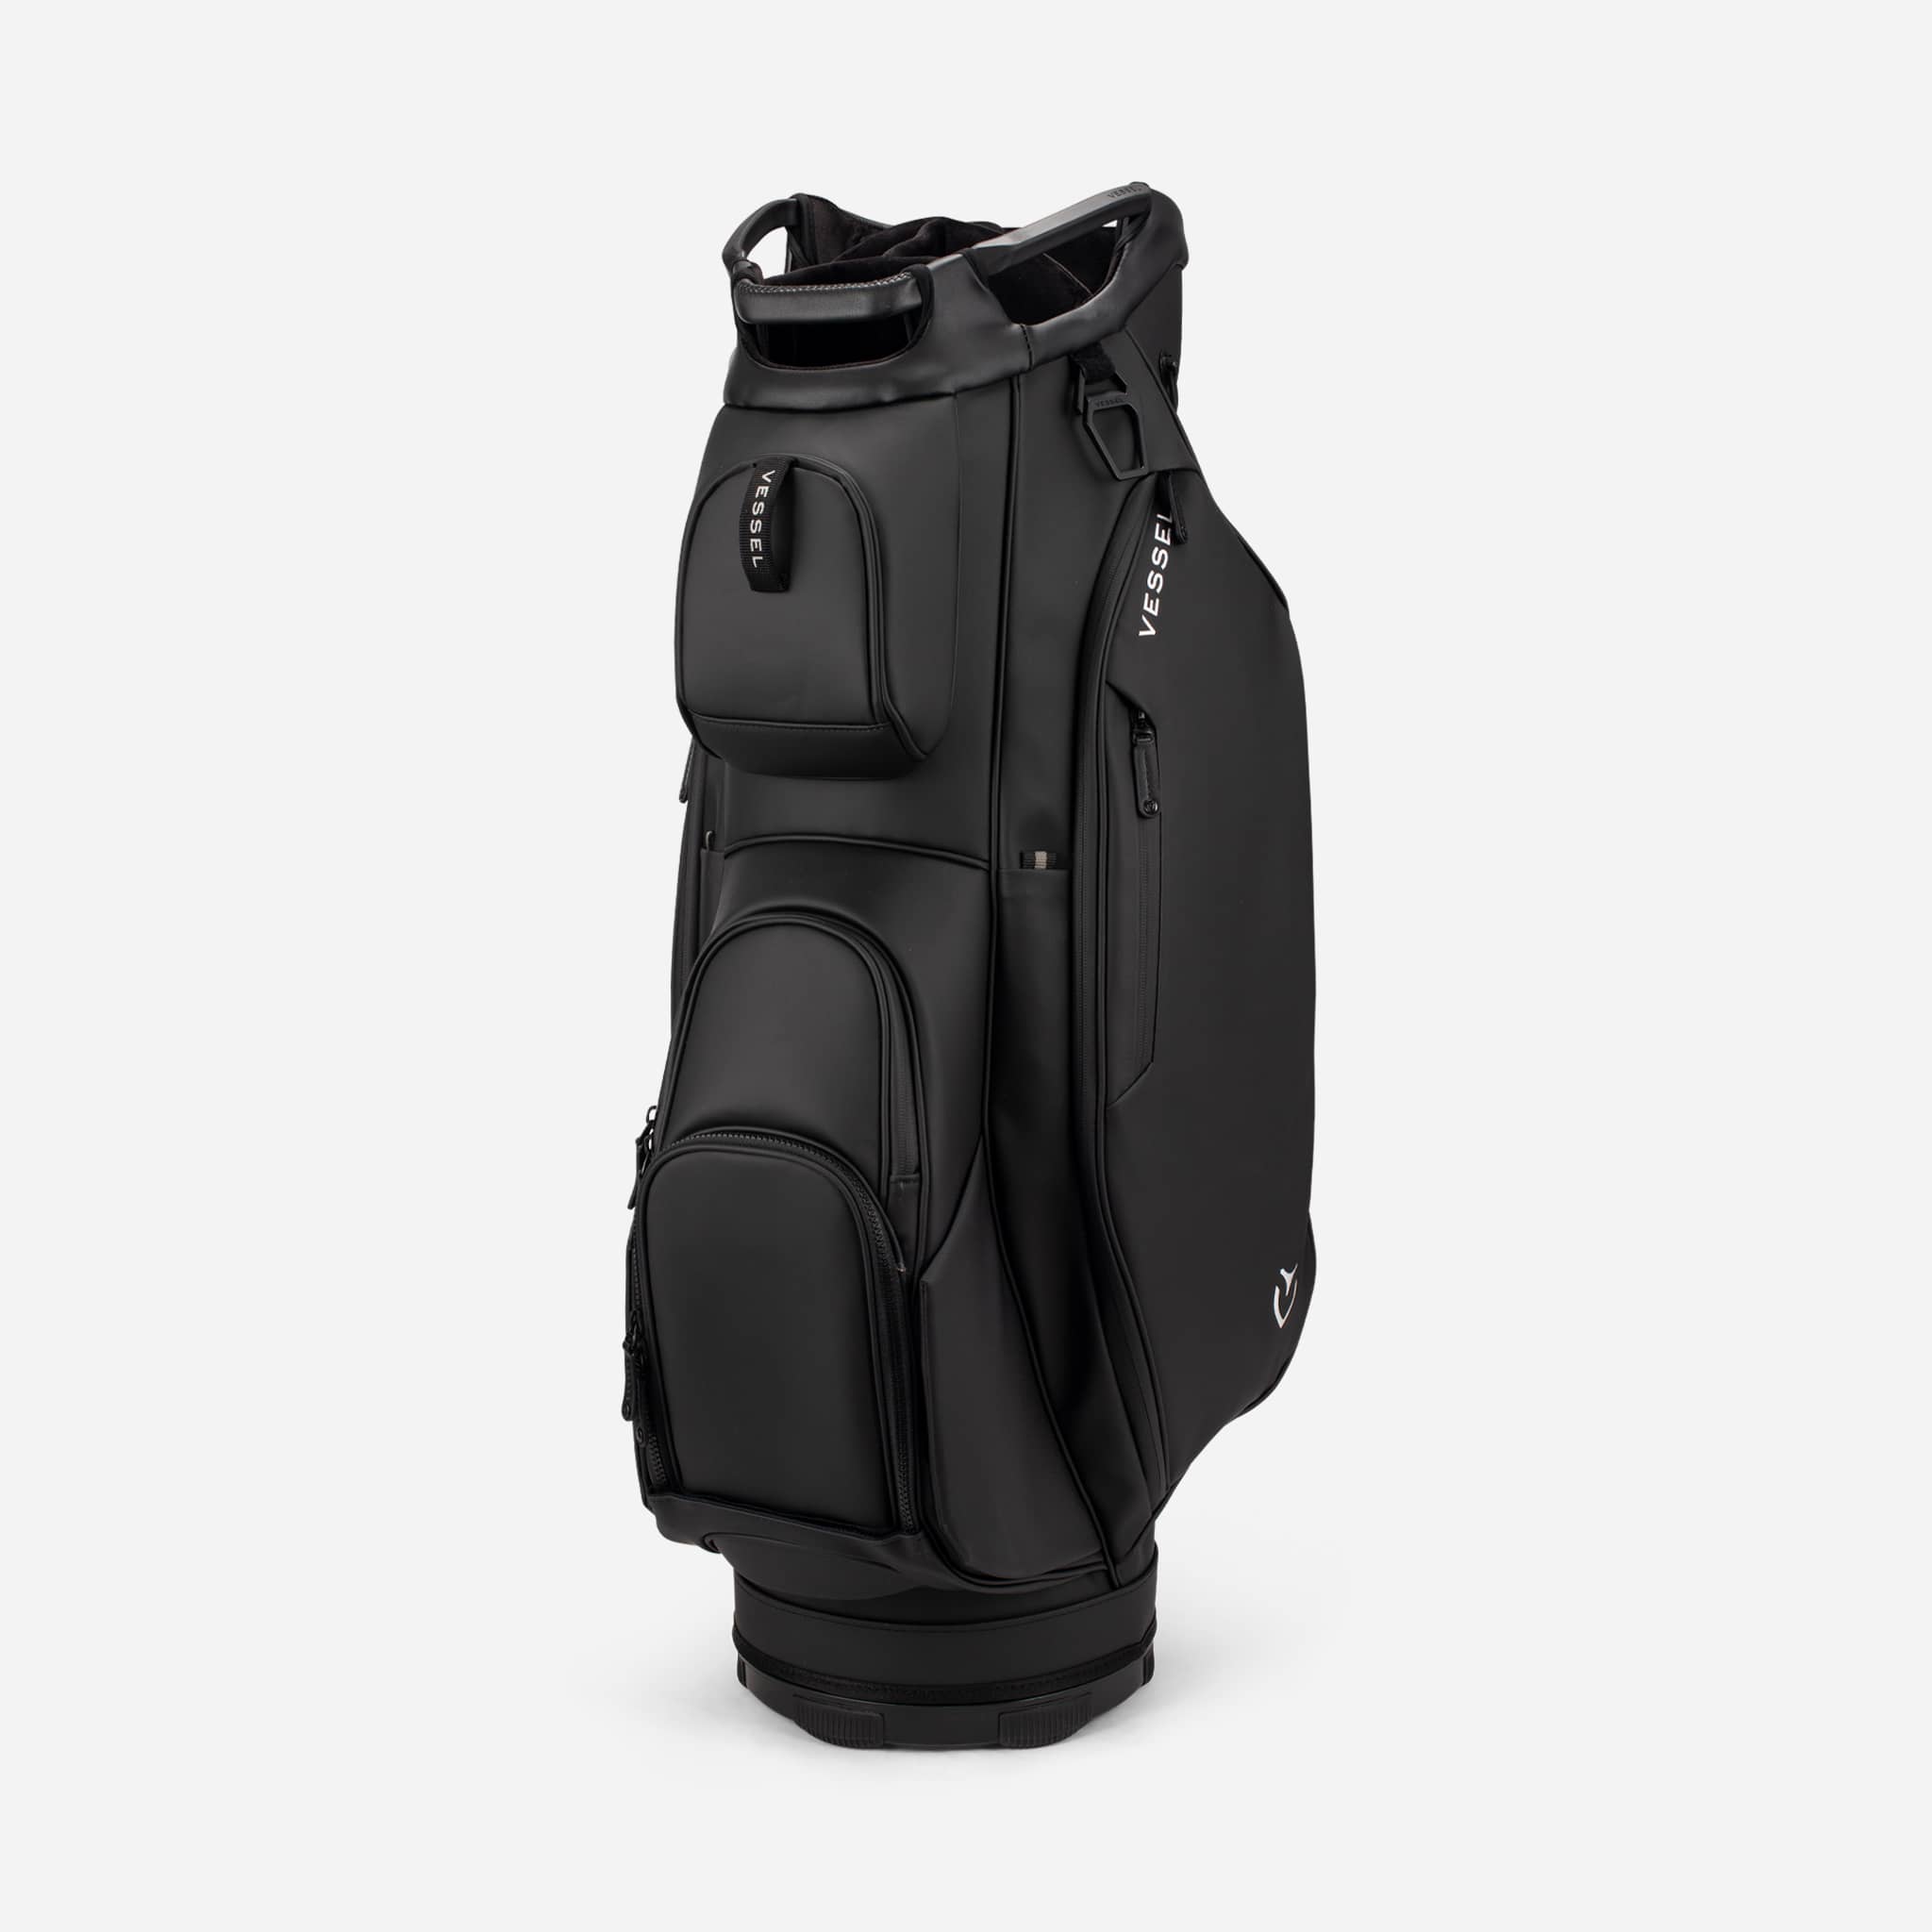 Optimizing Your Golf Bag Organization: How to Arrange Your Clubs in a Cart Bag